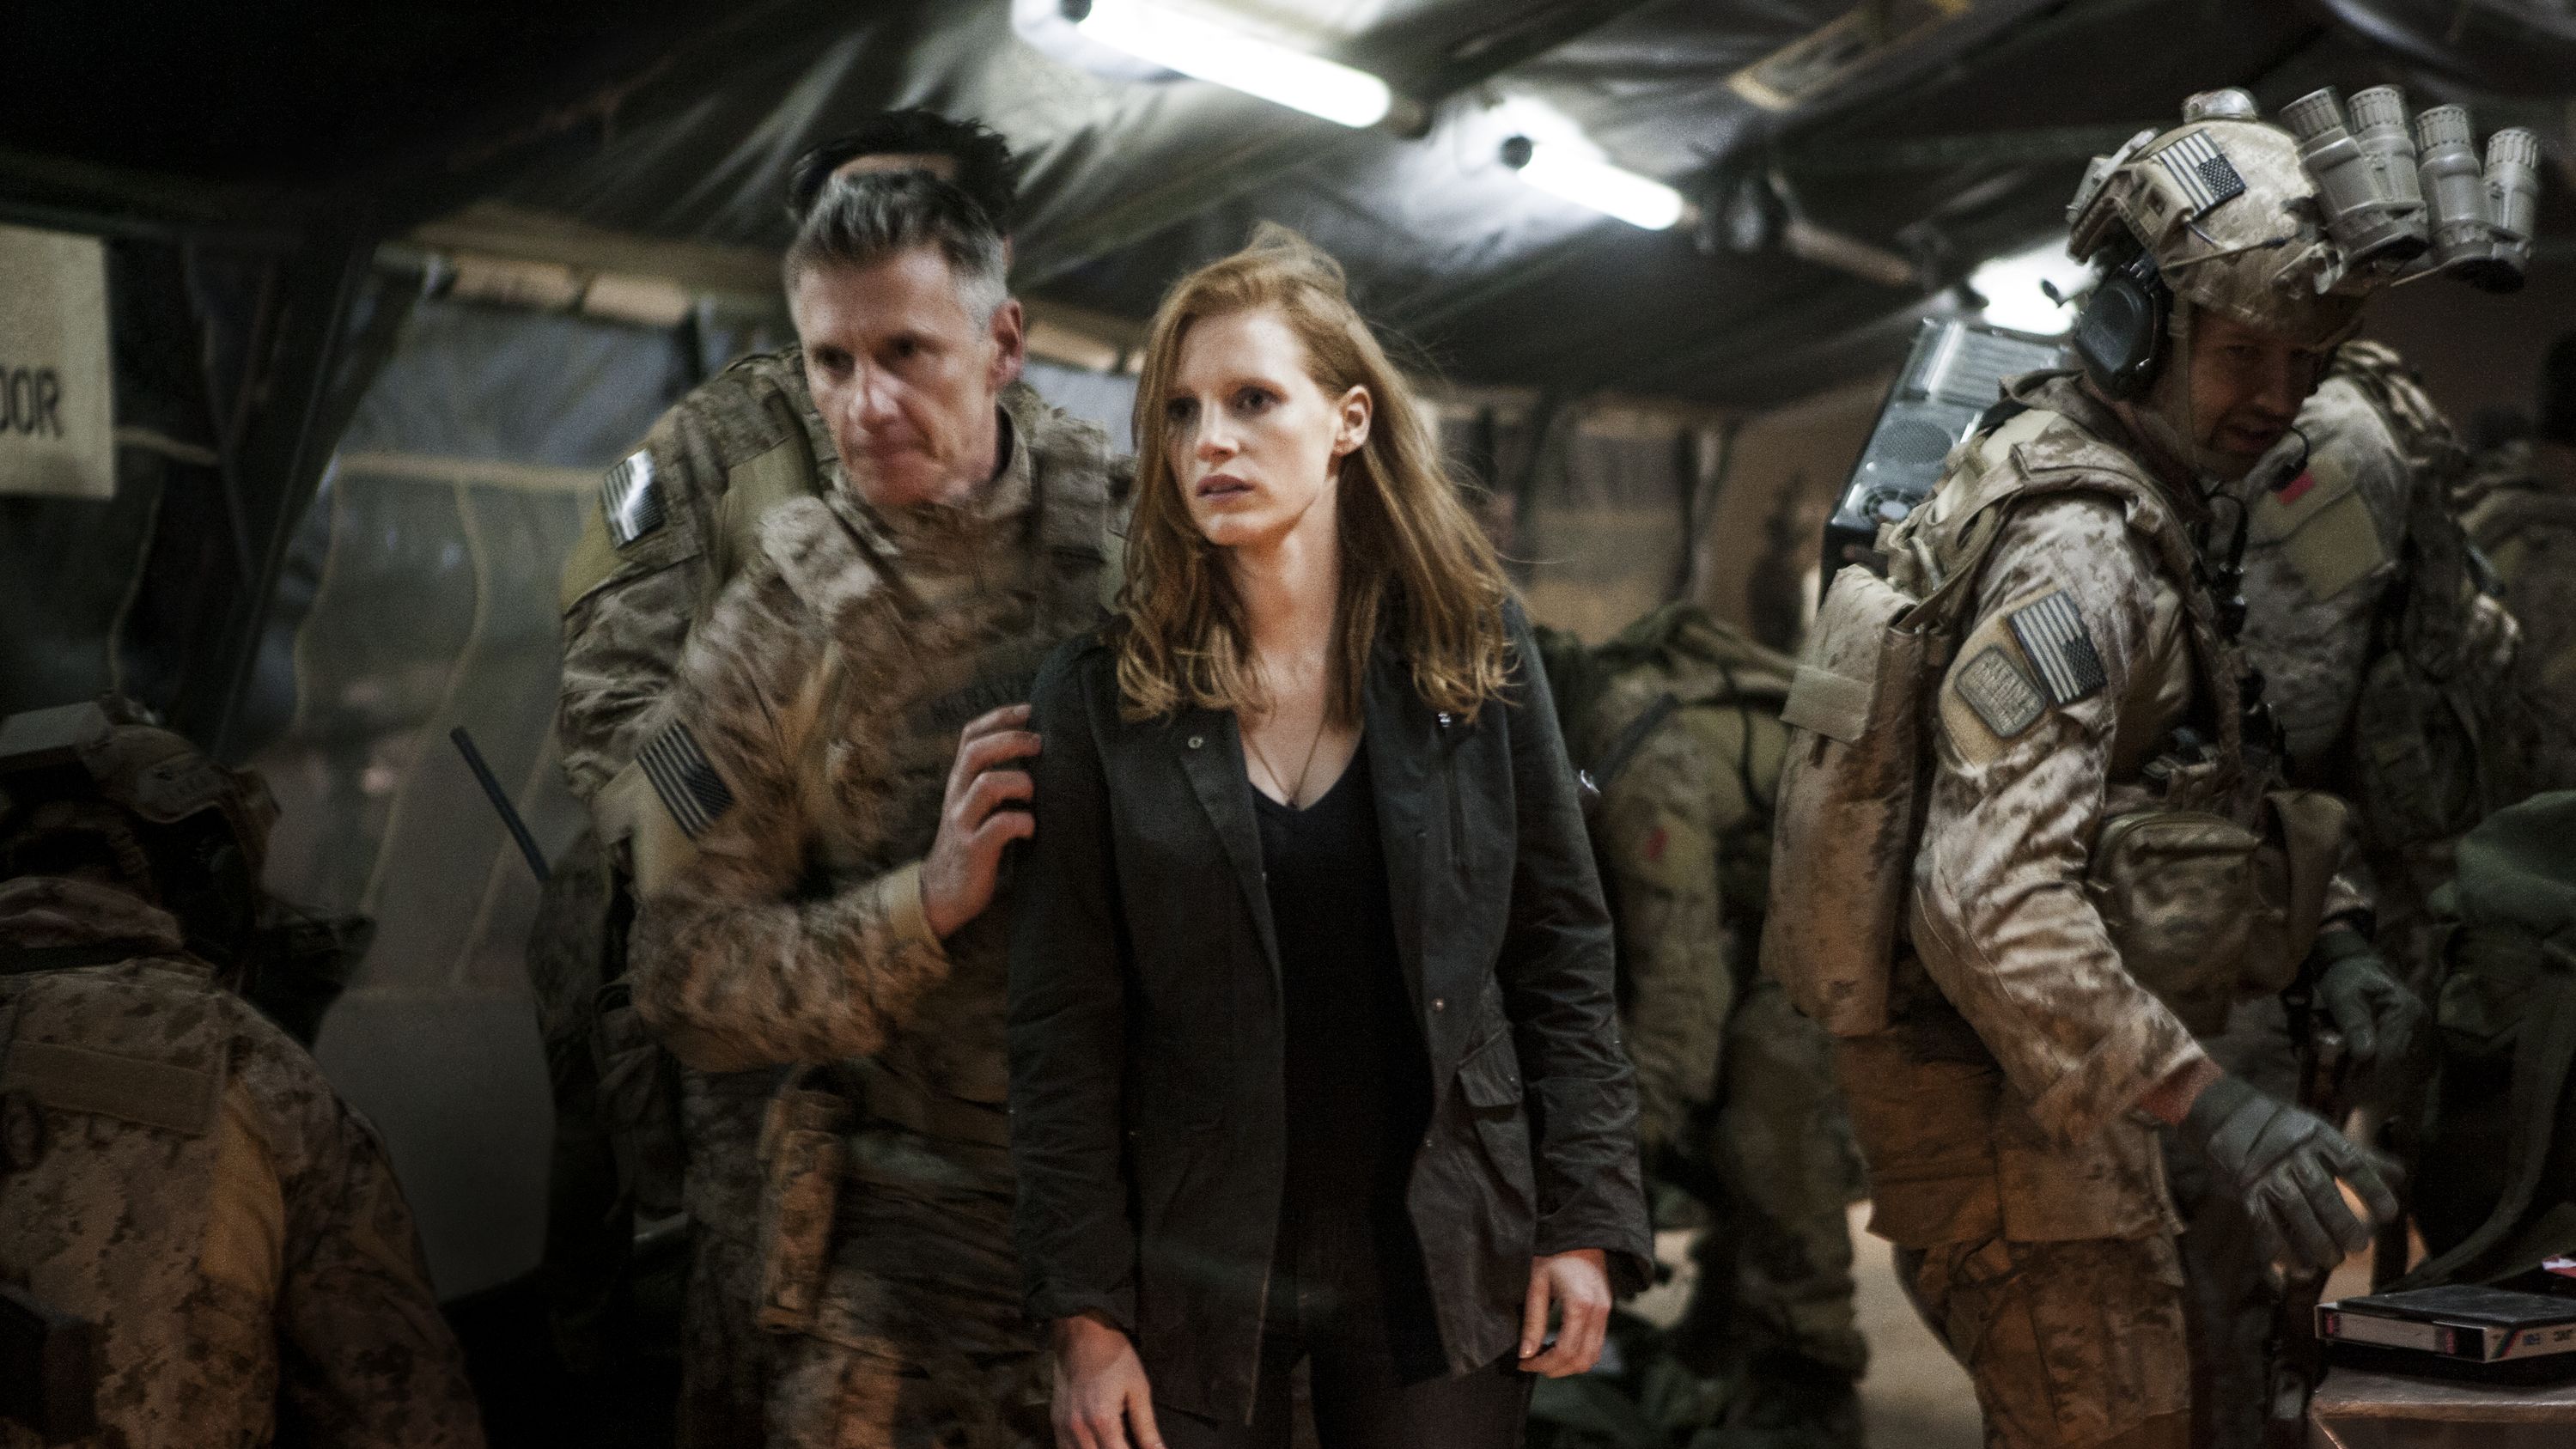 In the new film "Zero Dark Thirty," Jessica Chastain plays a CIA analyst who is part of the team hunting Osama bin Laden. 